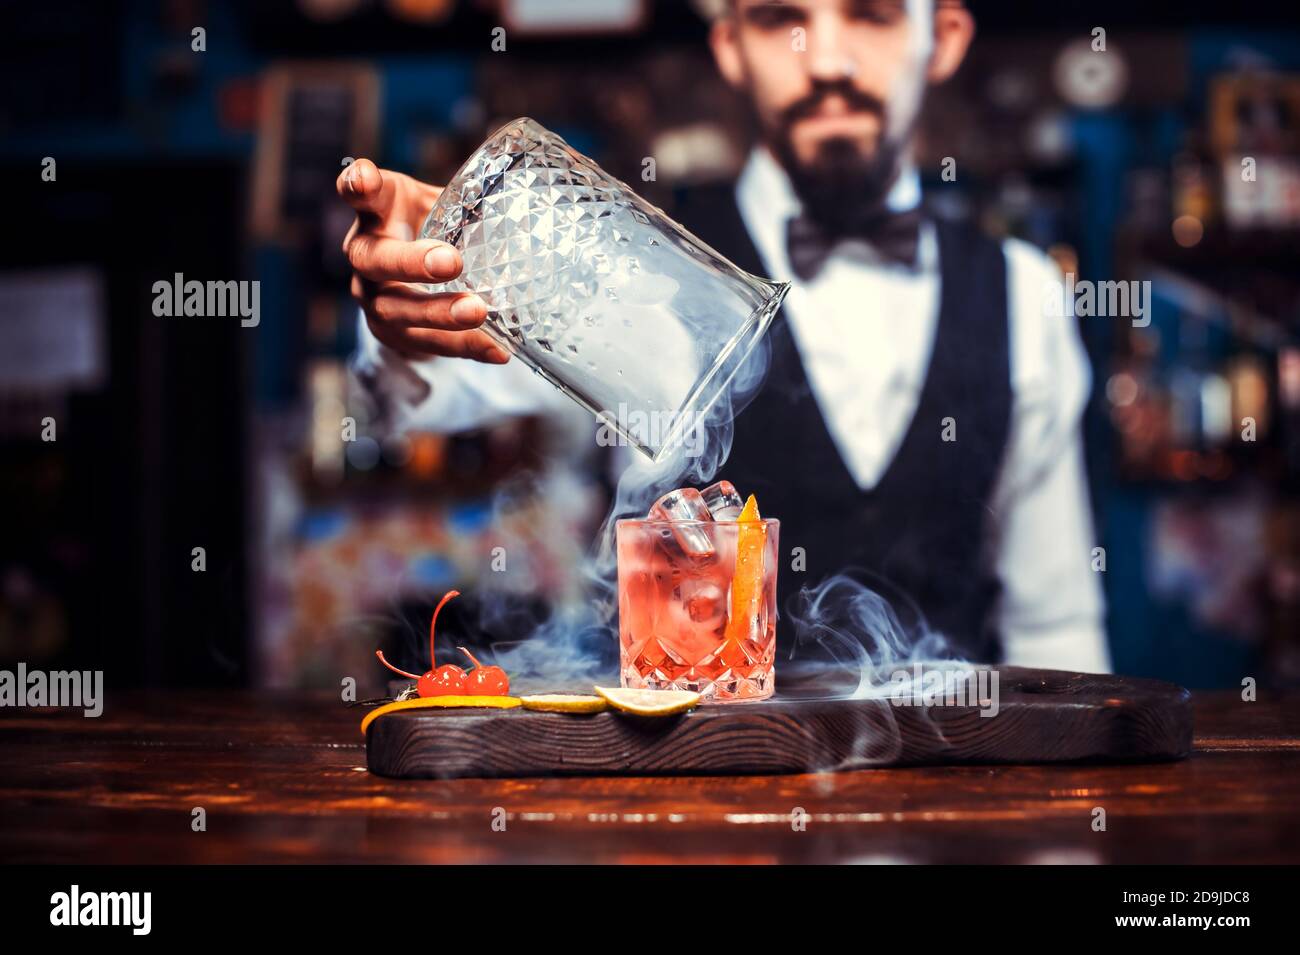 Focused bartender demonstrates the process of making a cocktail Stock Photo  - Alamy